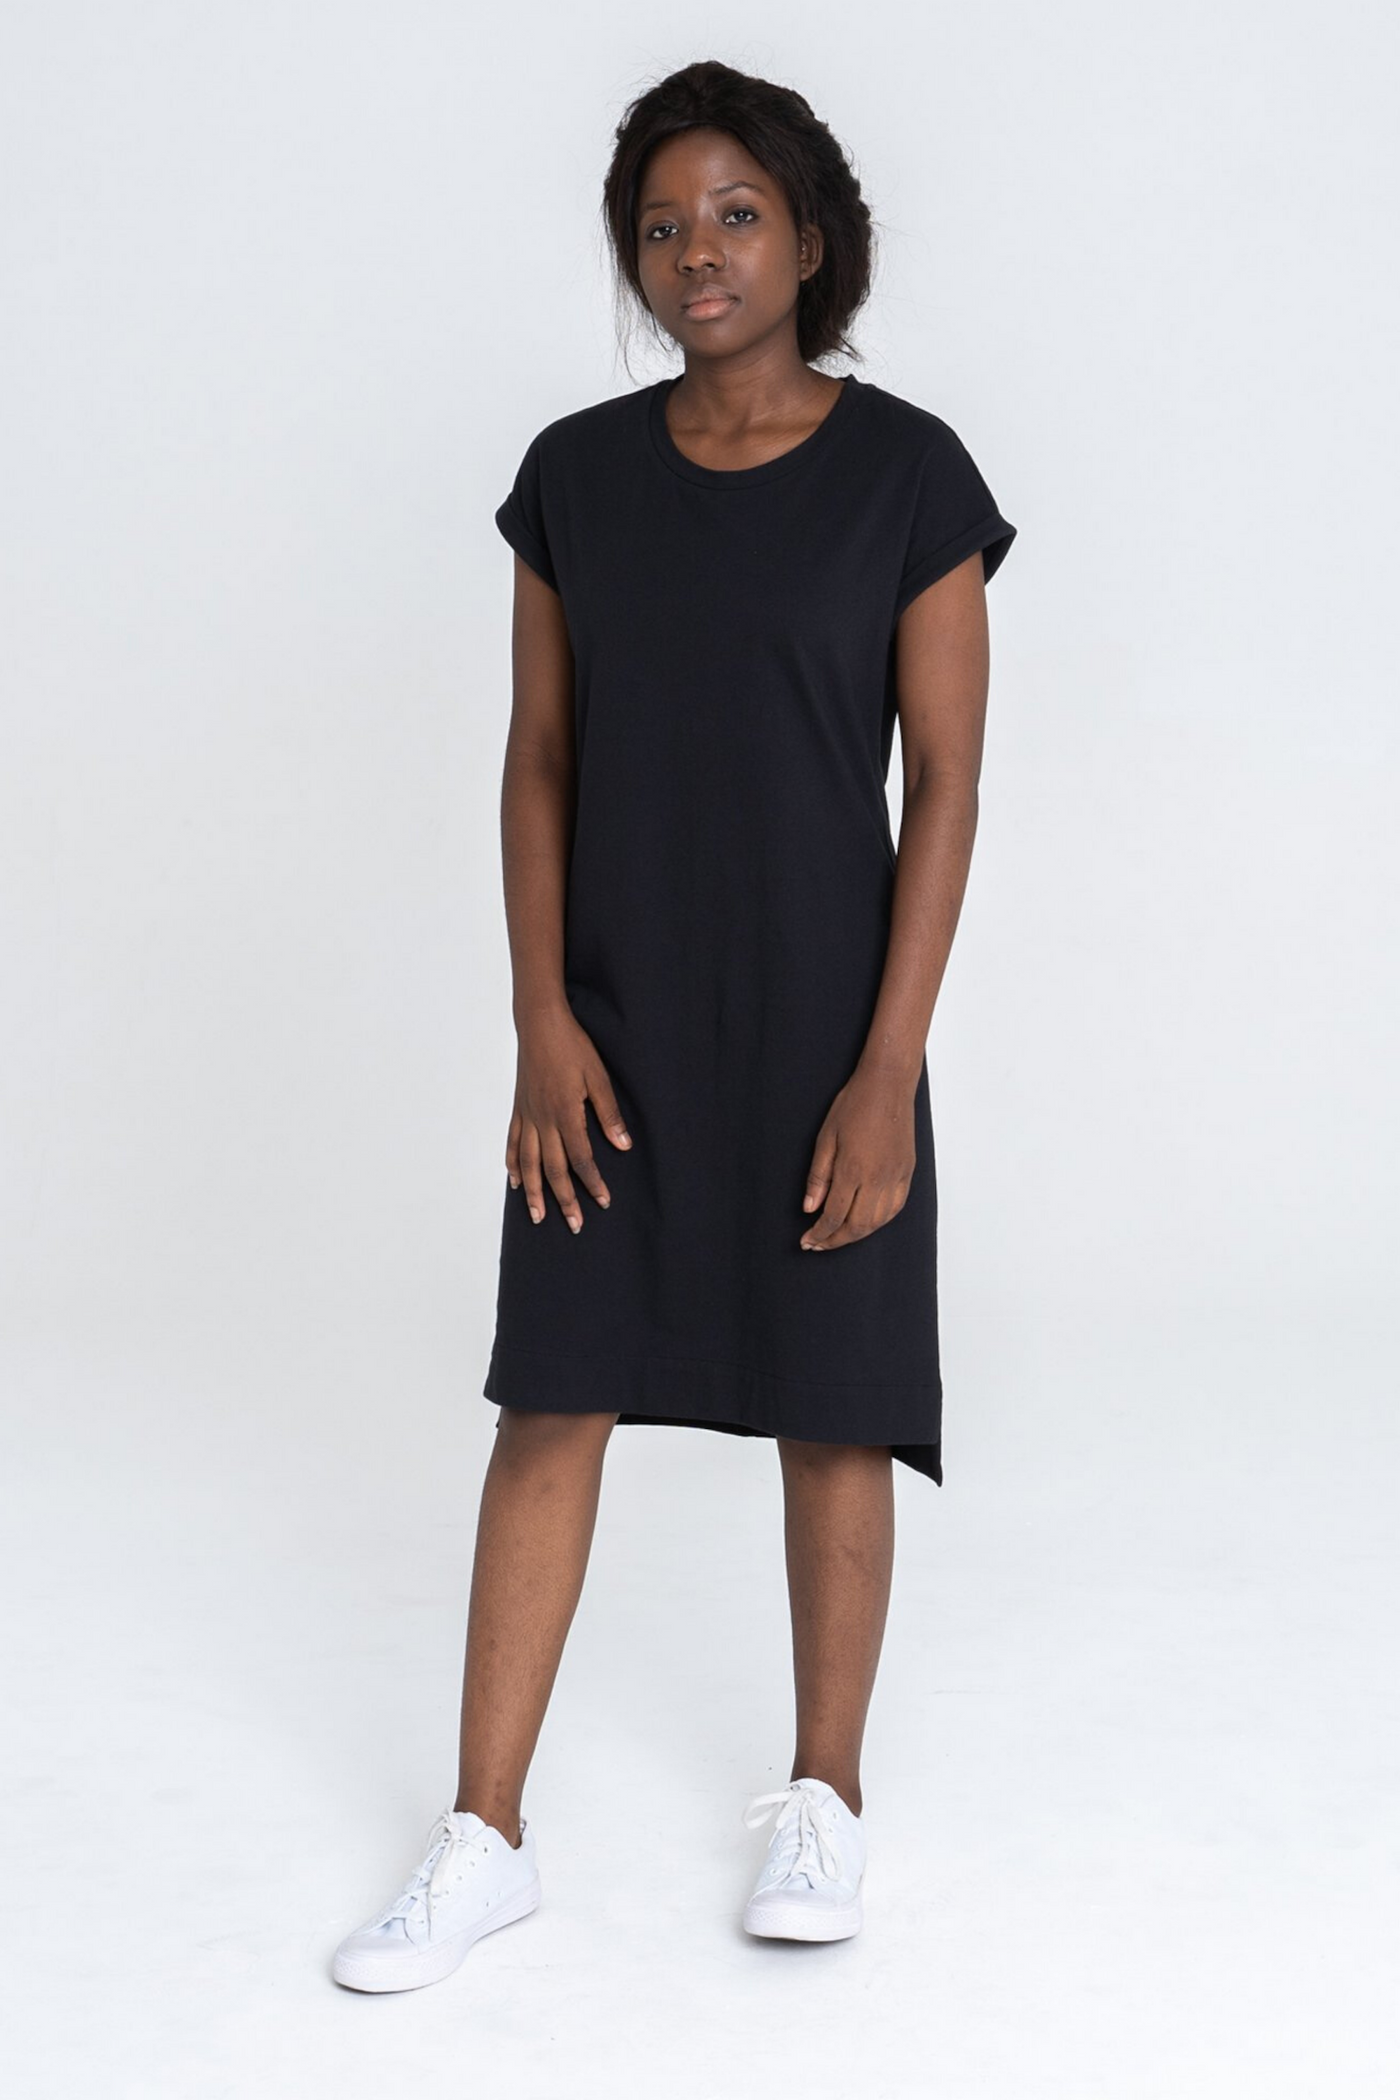 Dorsu Rolled Sleeve T-shirt Dress in Black, available on ZERRIN